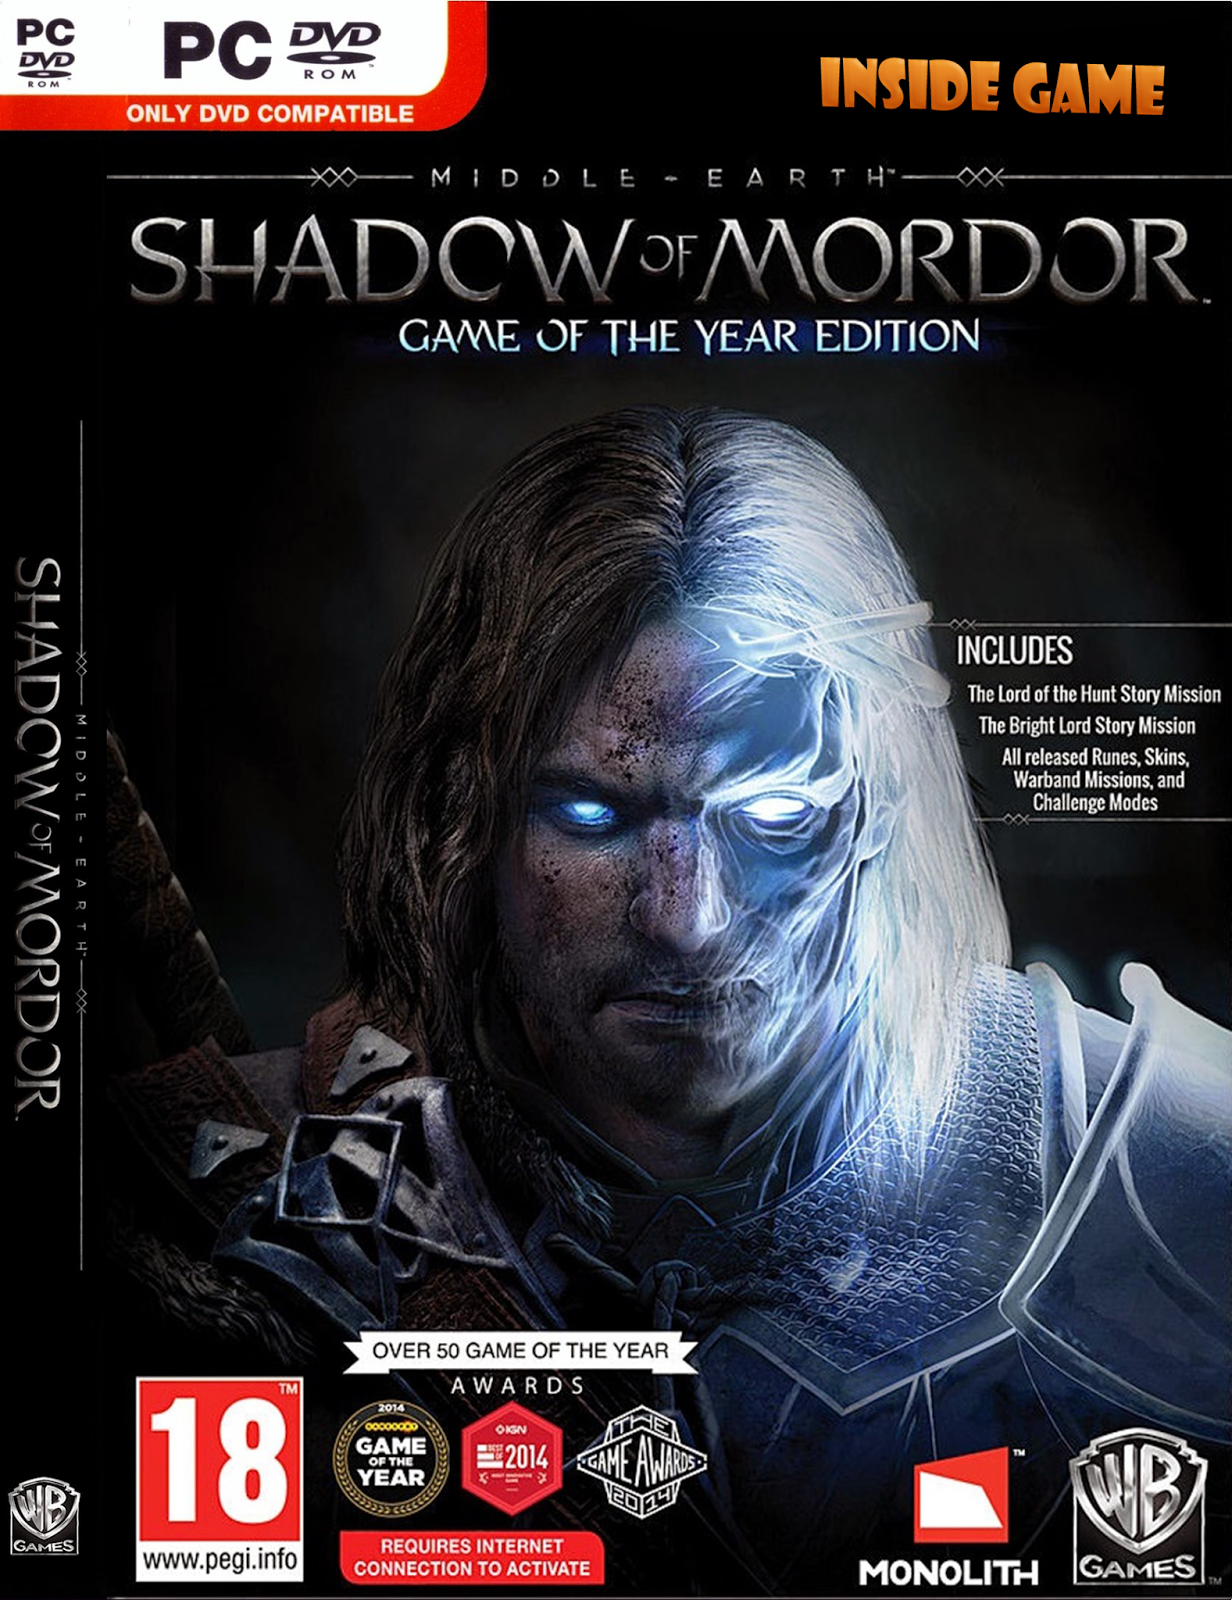 shadow of mordor pc game fix